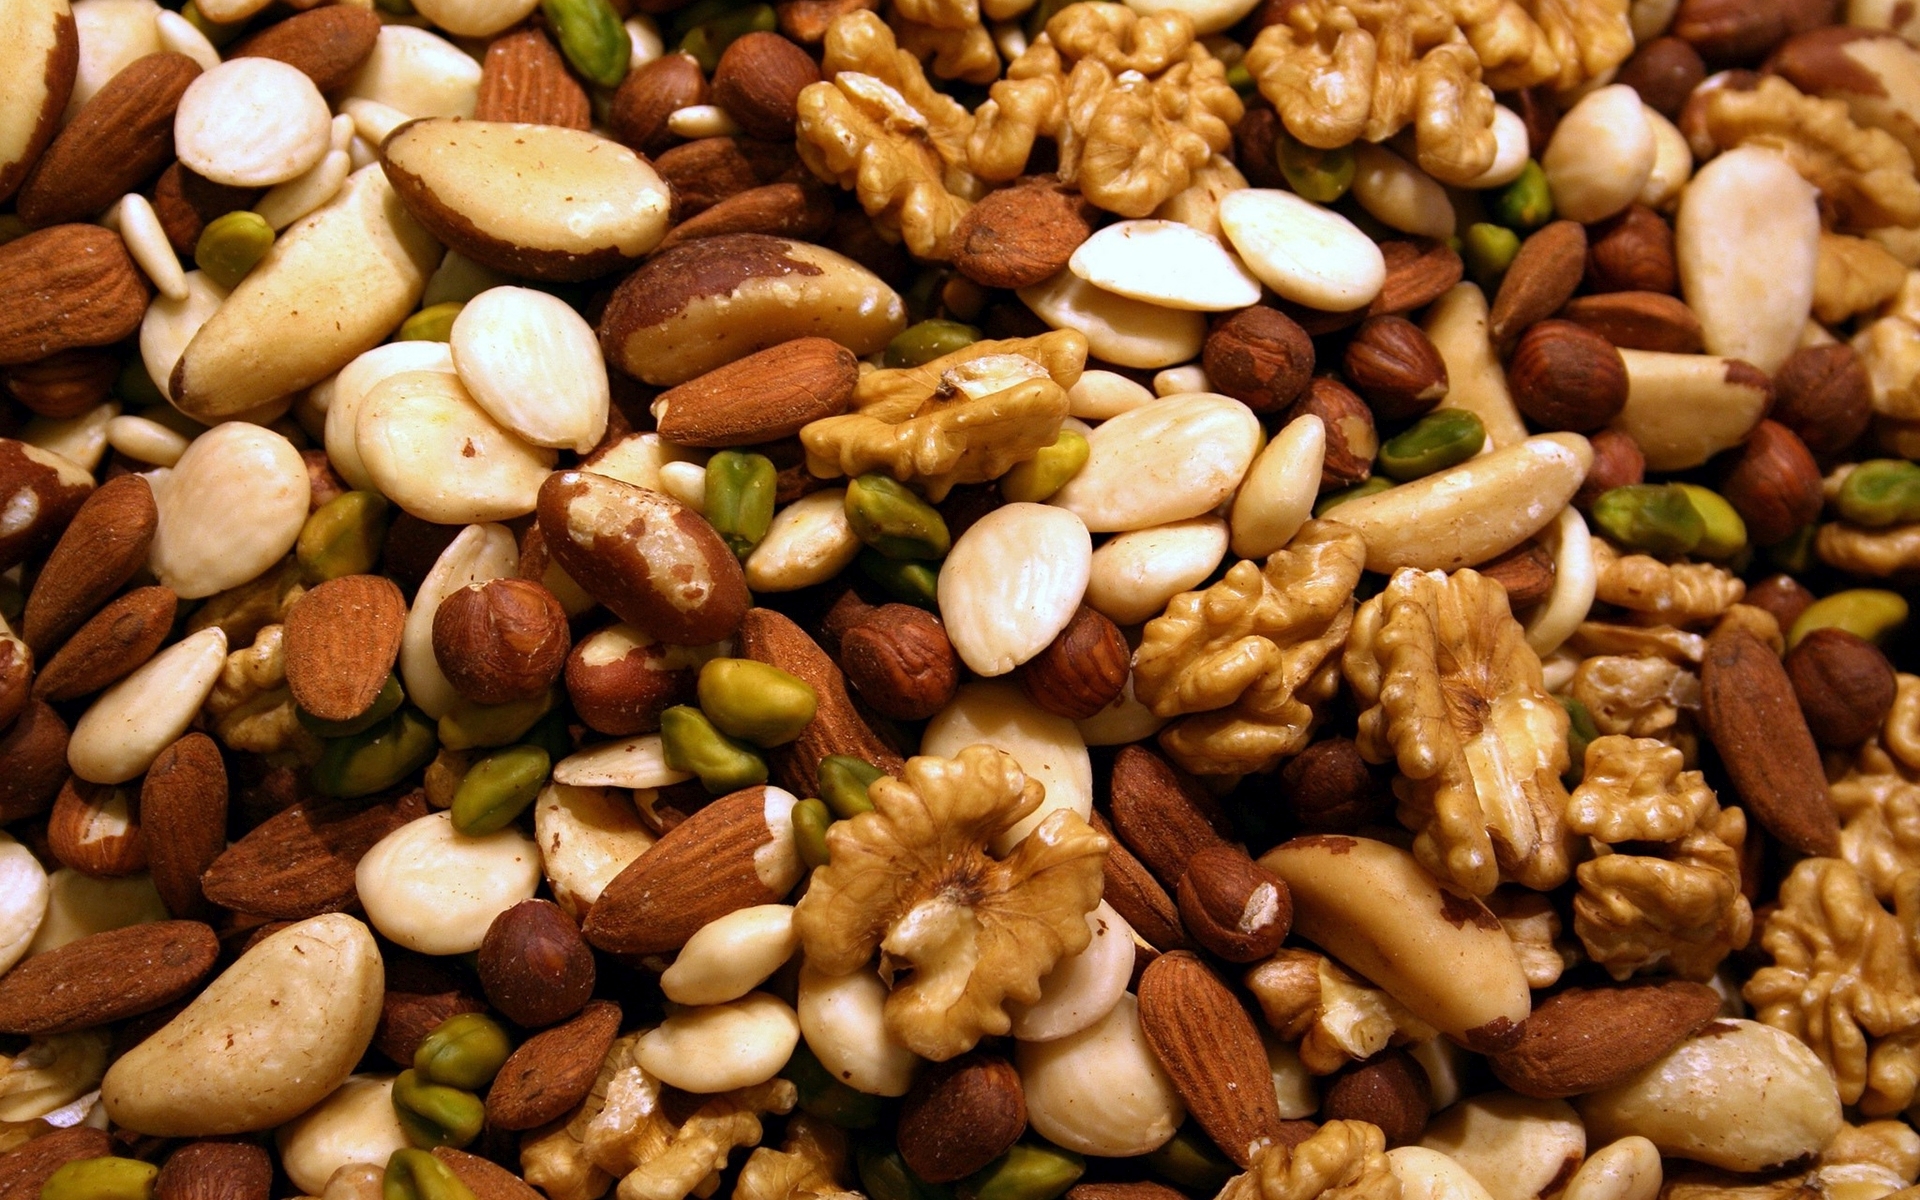 Download Nuts Wallpapers 28170 1920x1200.